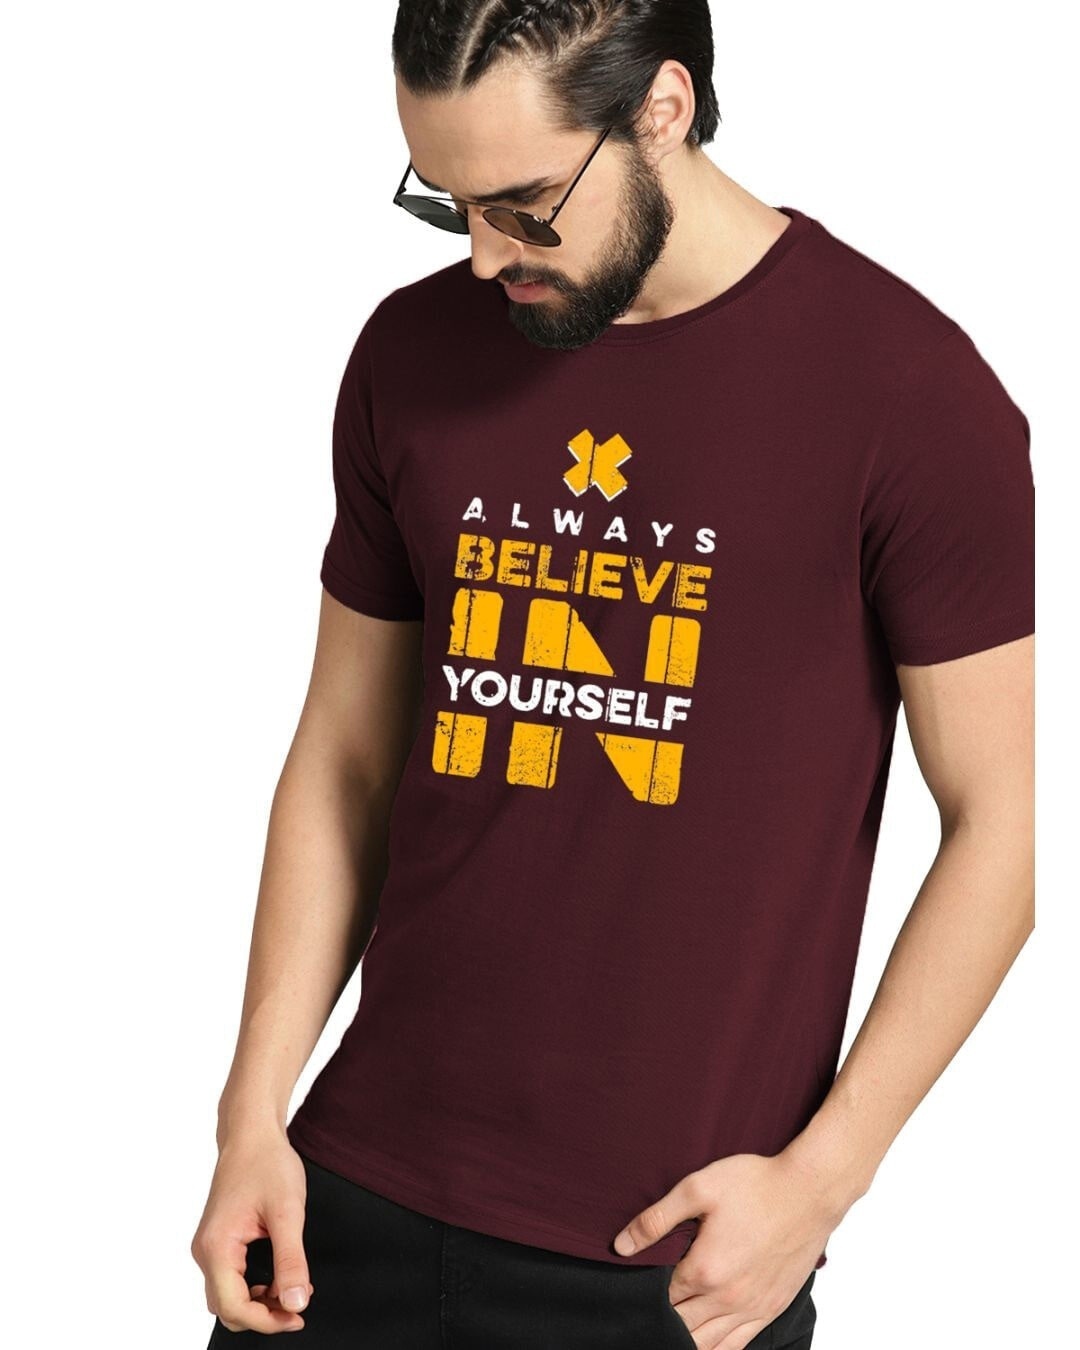 Shop Believe in Yourself Printed T-shirt for Men's-Design